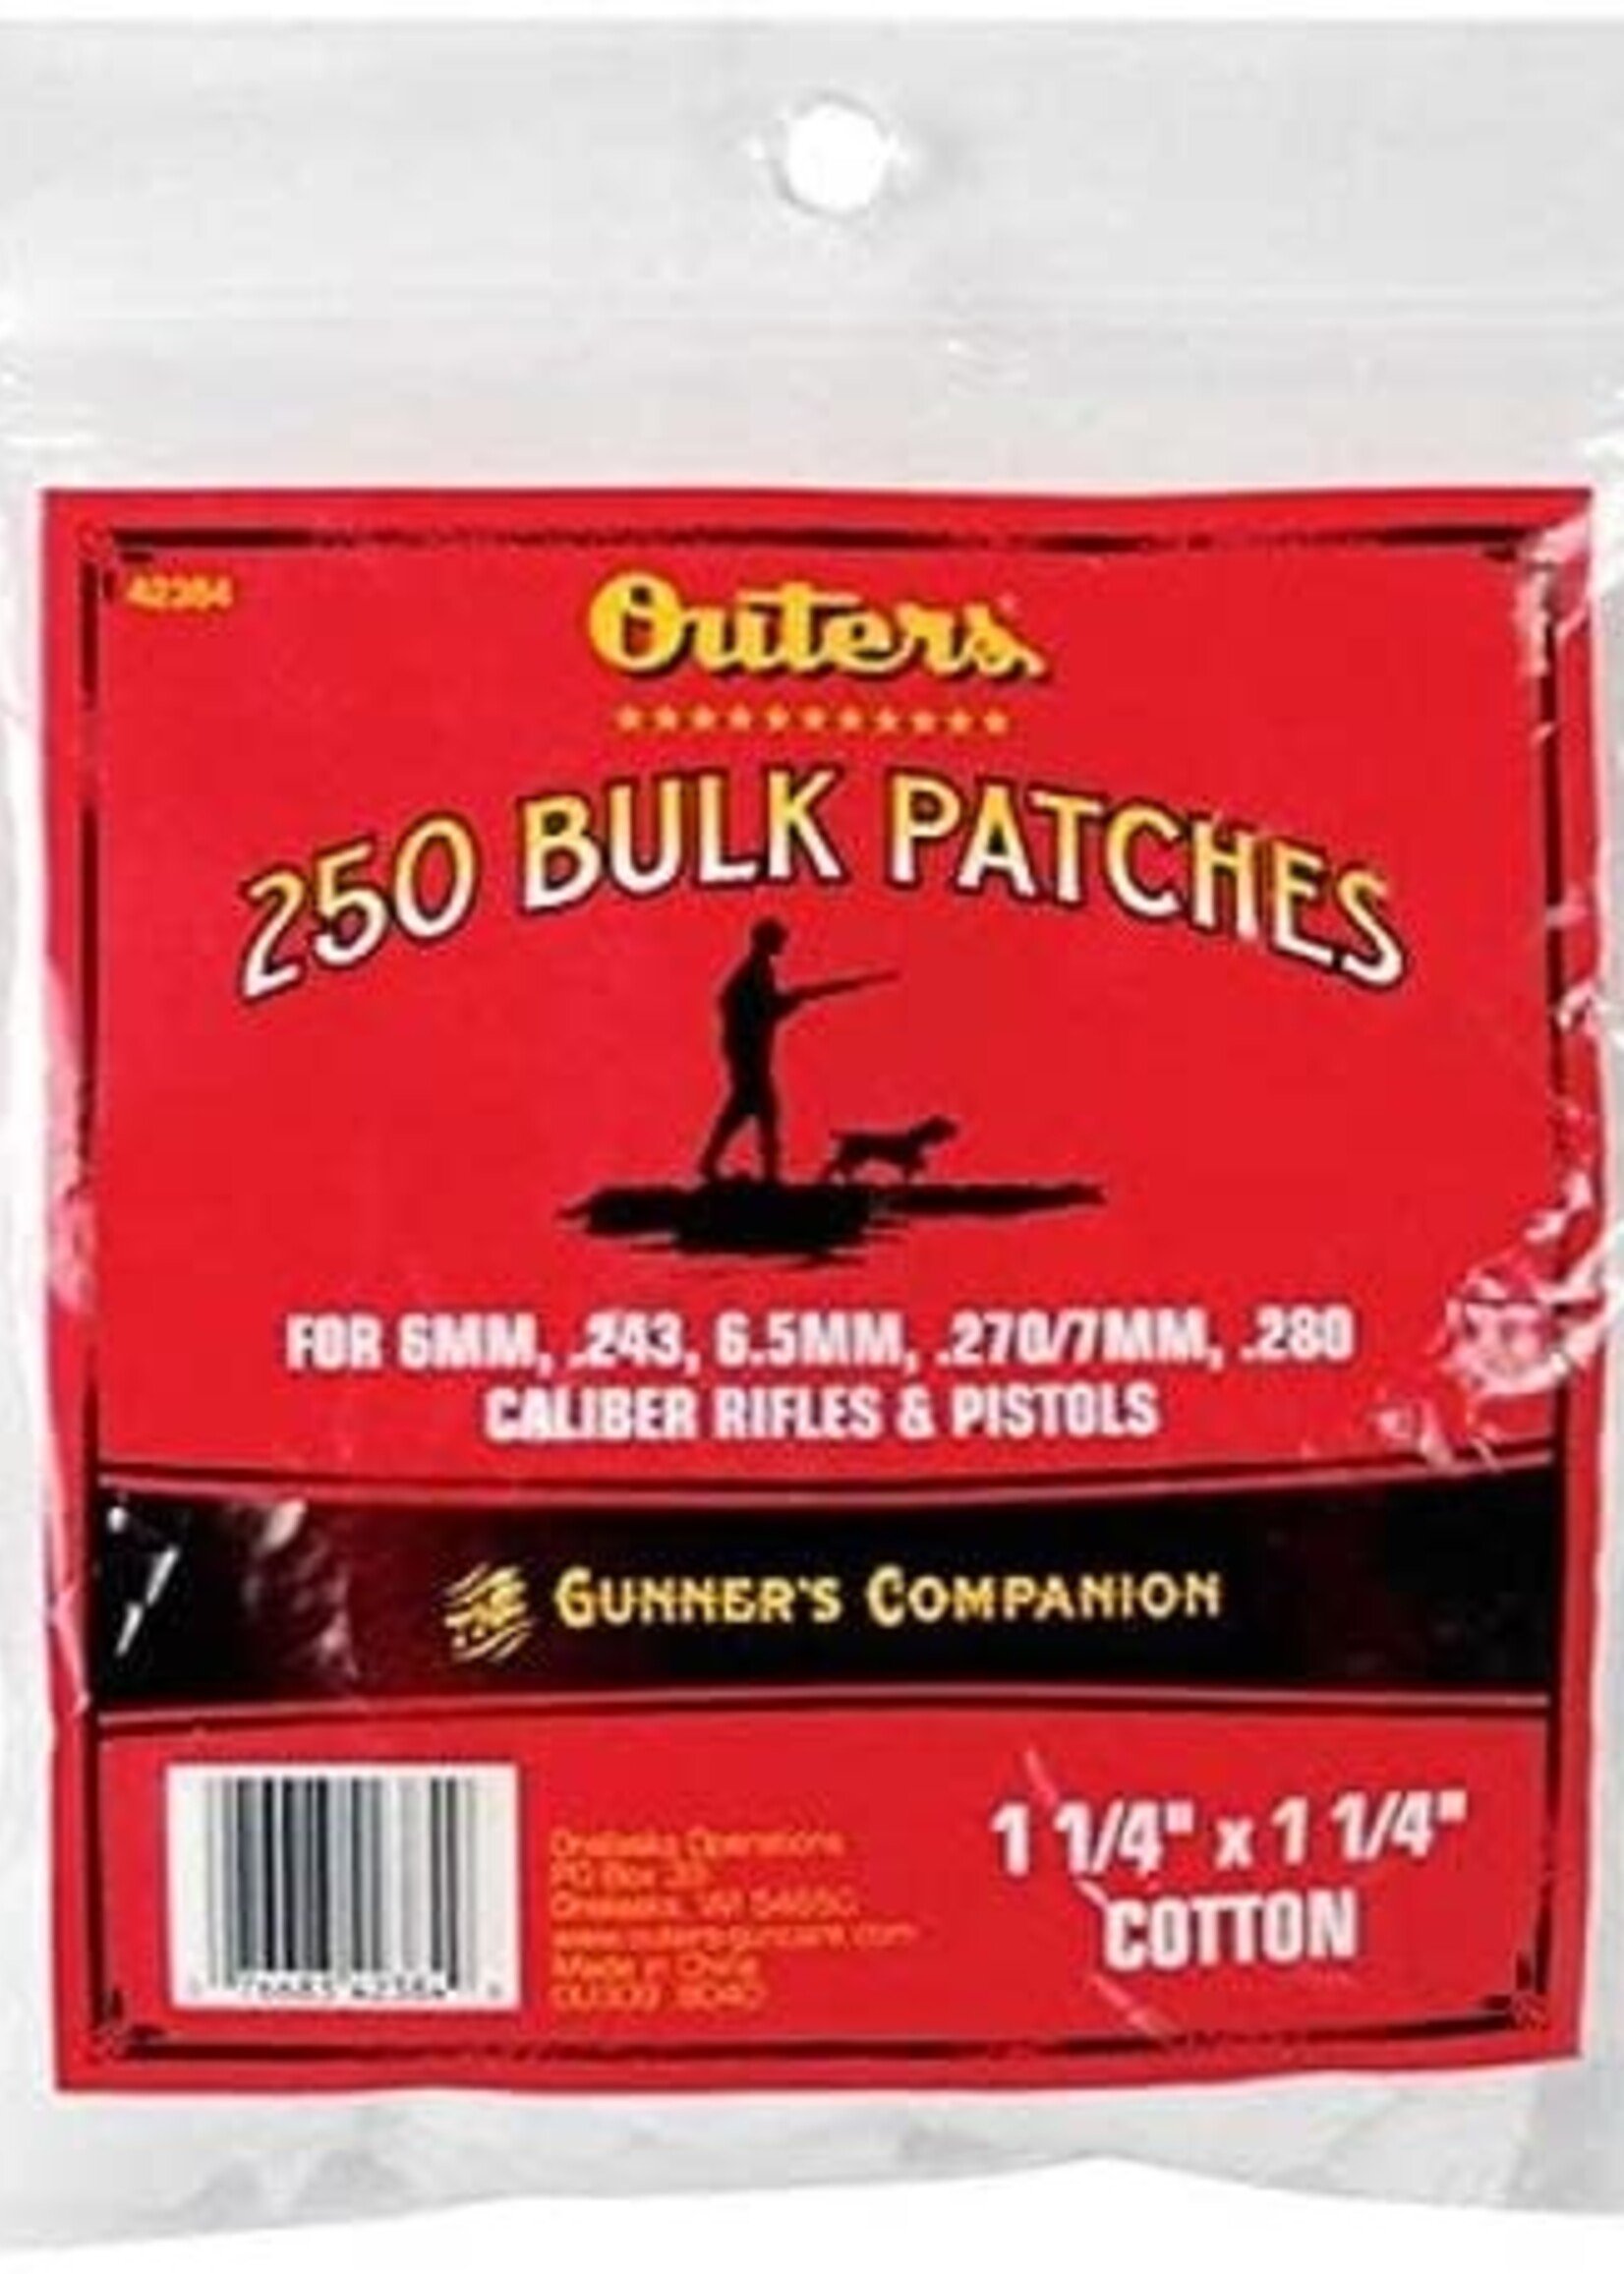 Outers, Cleaning Patches, Bulk Pack, 6mm to .280 Cal Rifle and Pistol, 250 Count UPC# 076683423849